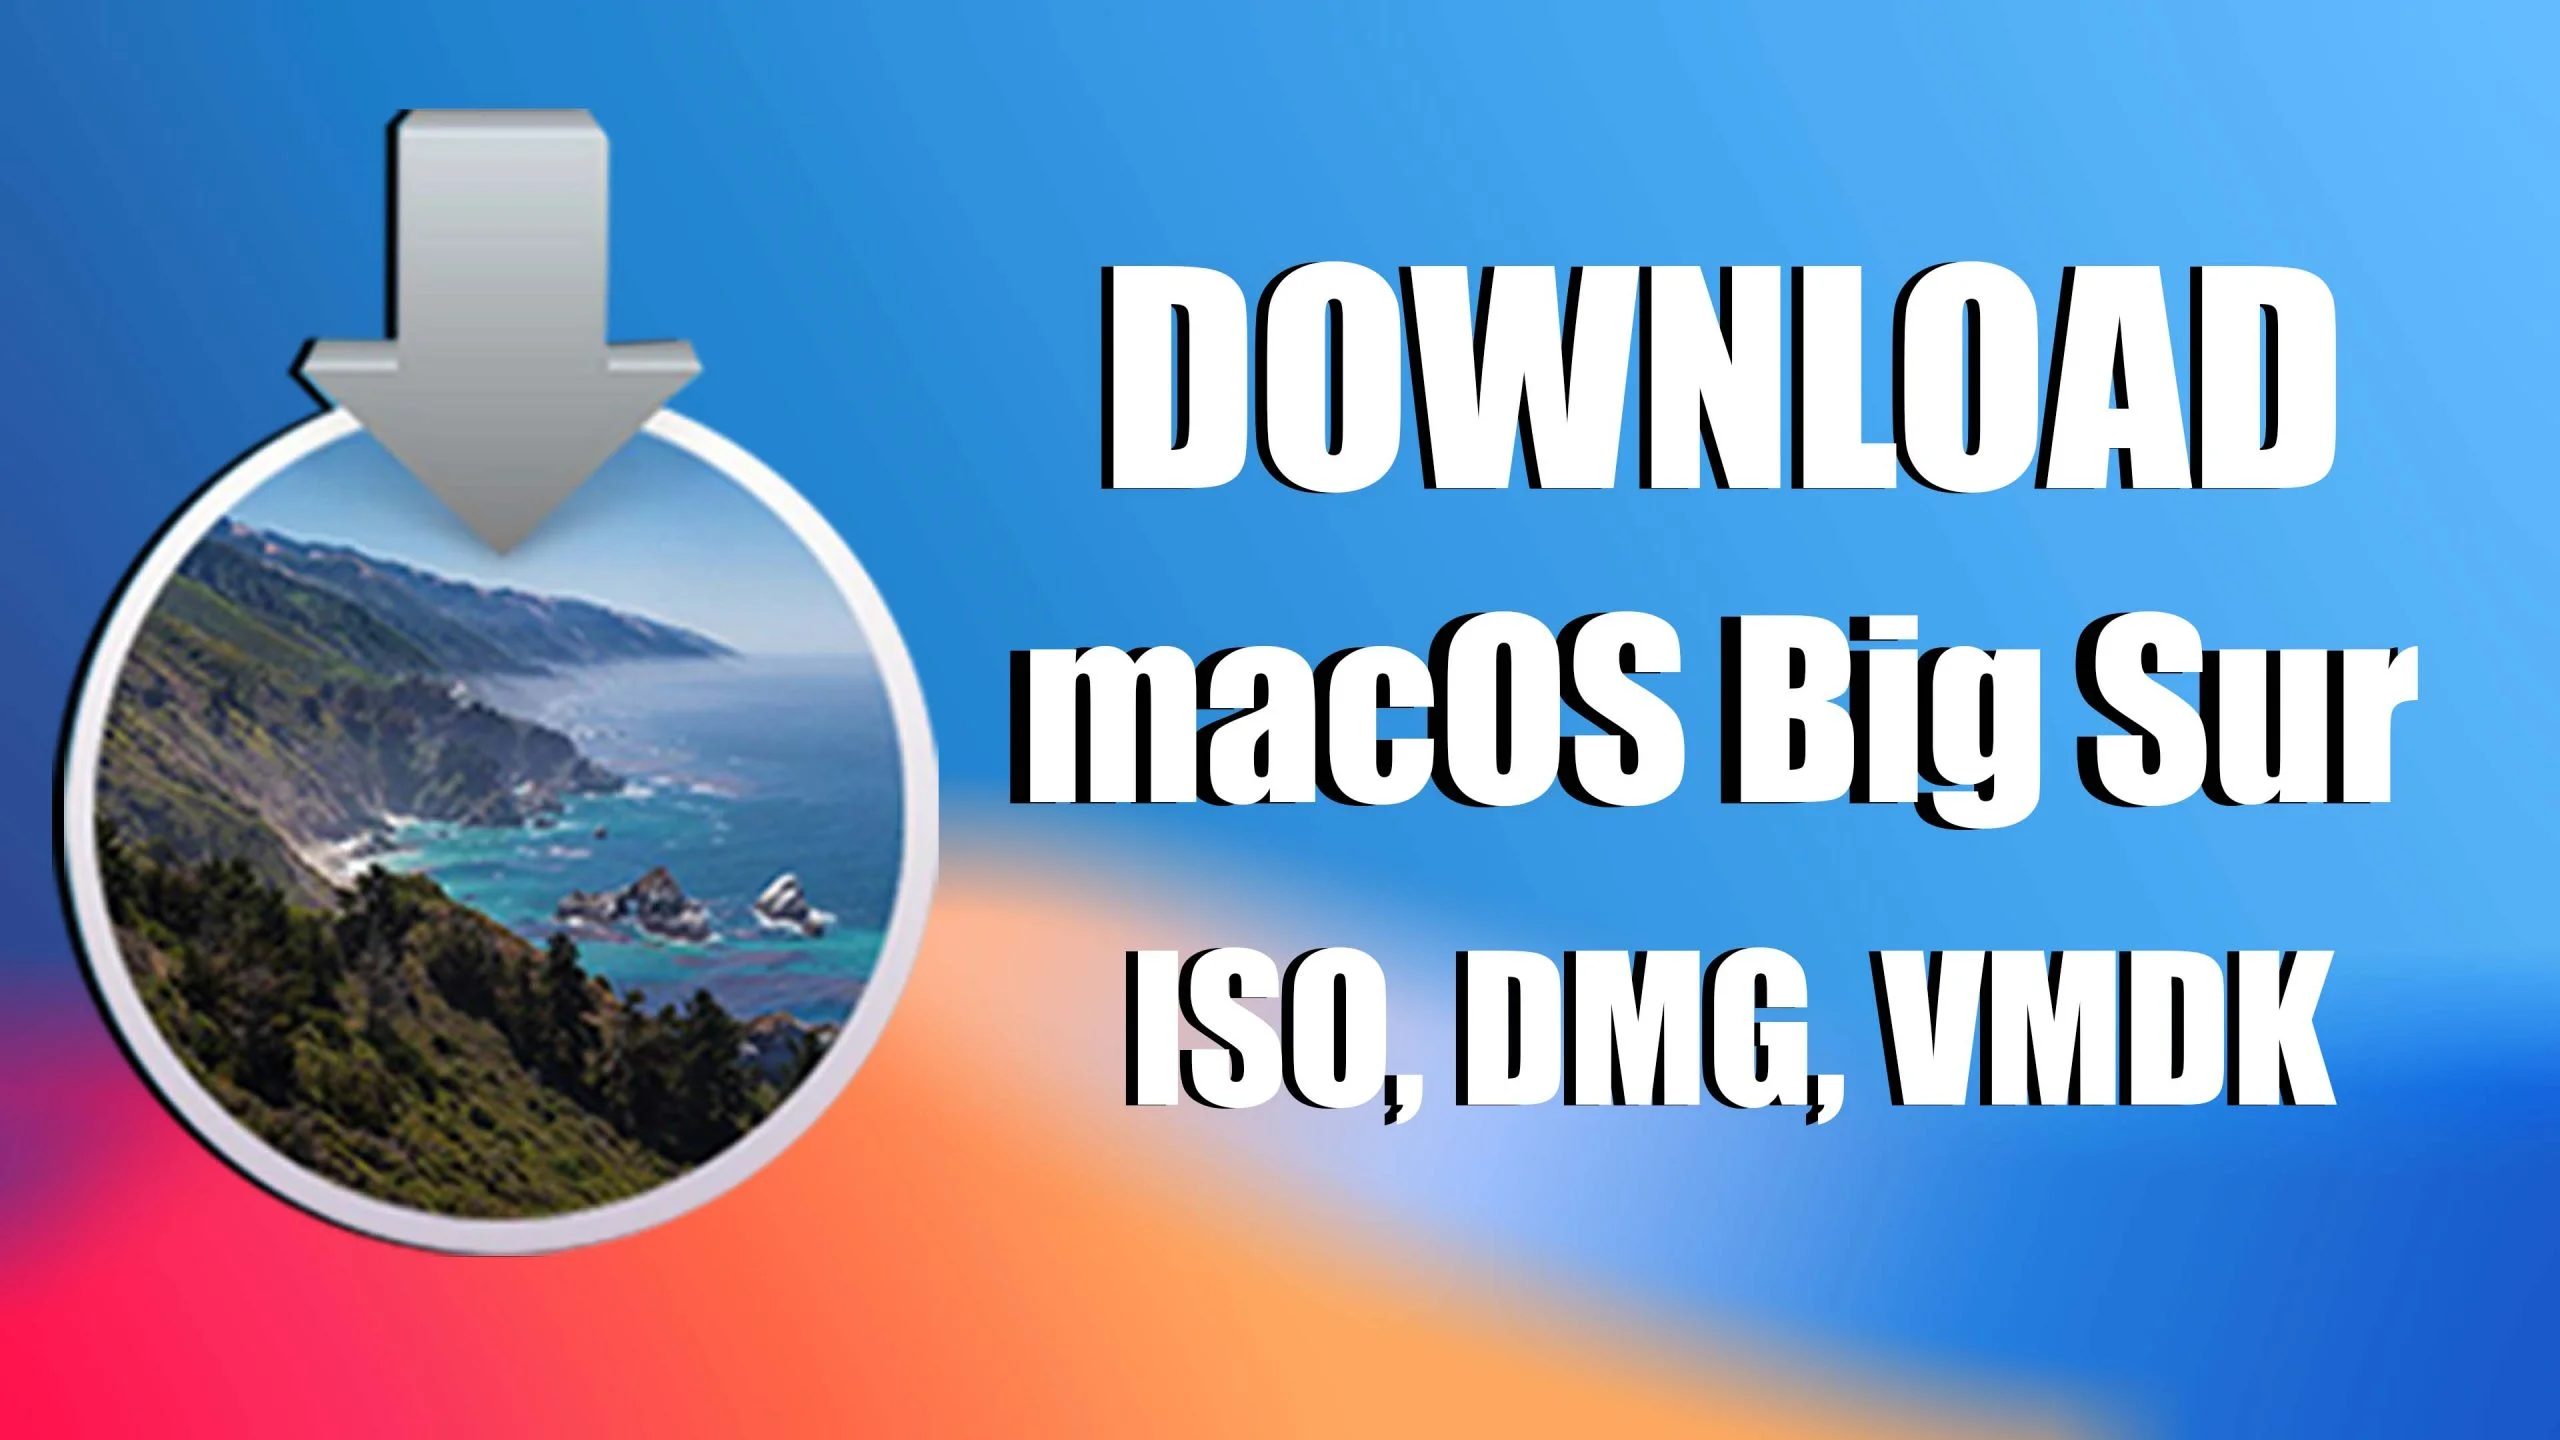 Download macOS Big Sur ISO, DMG, VMDK Files For Free